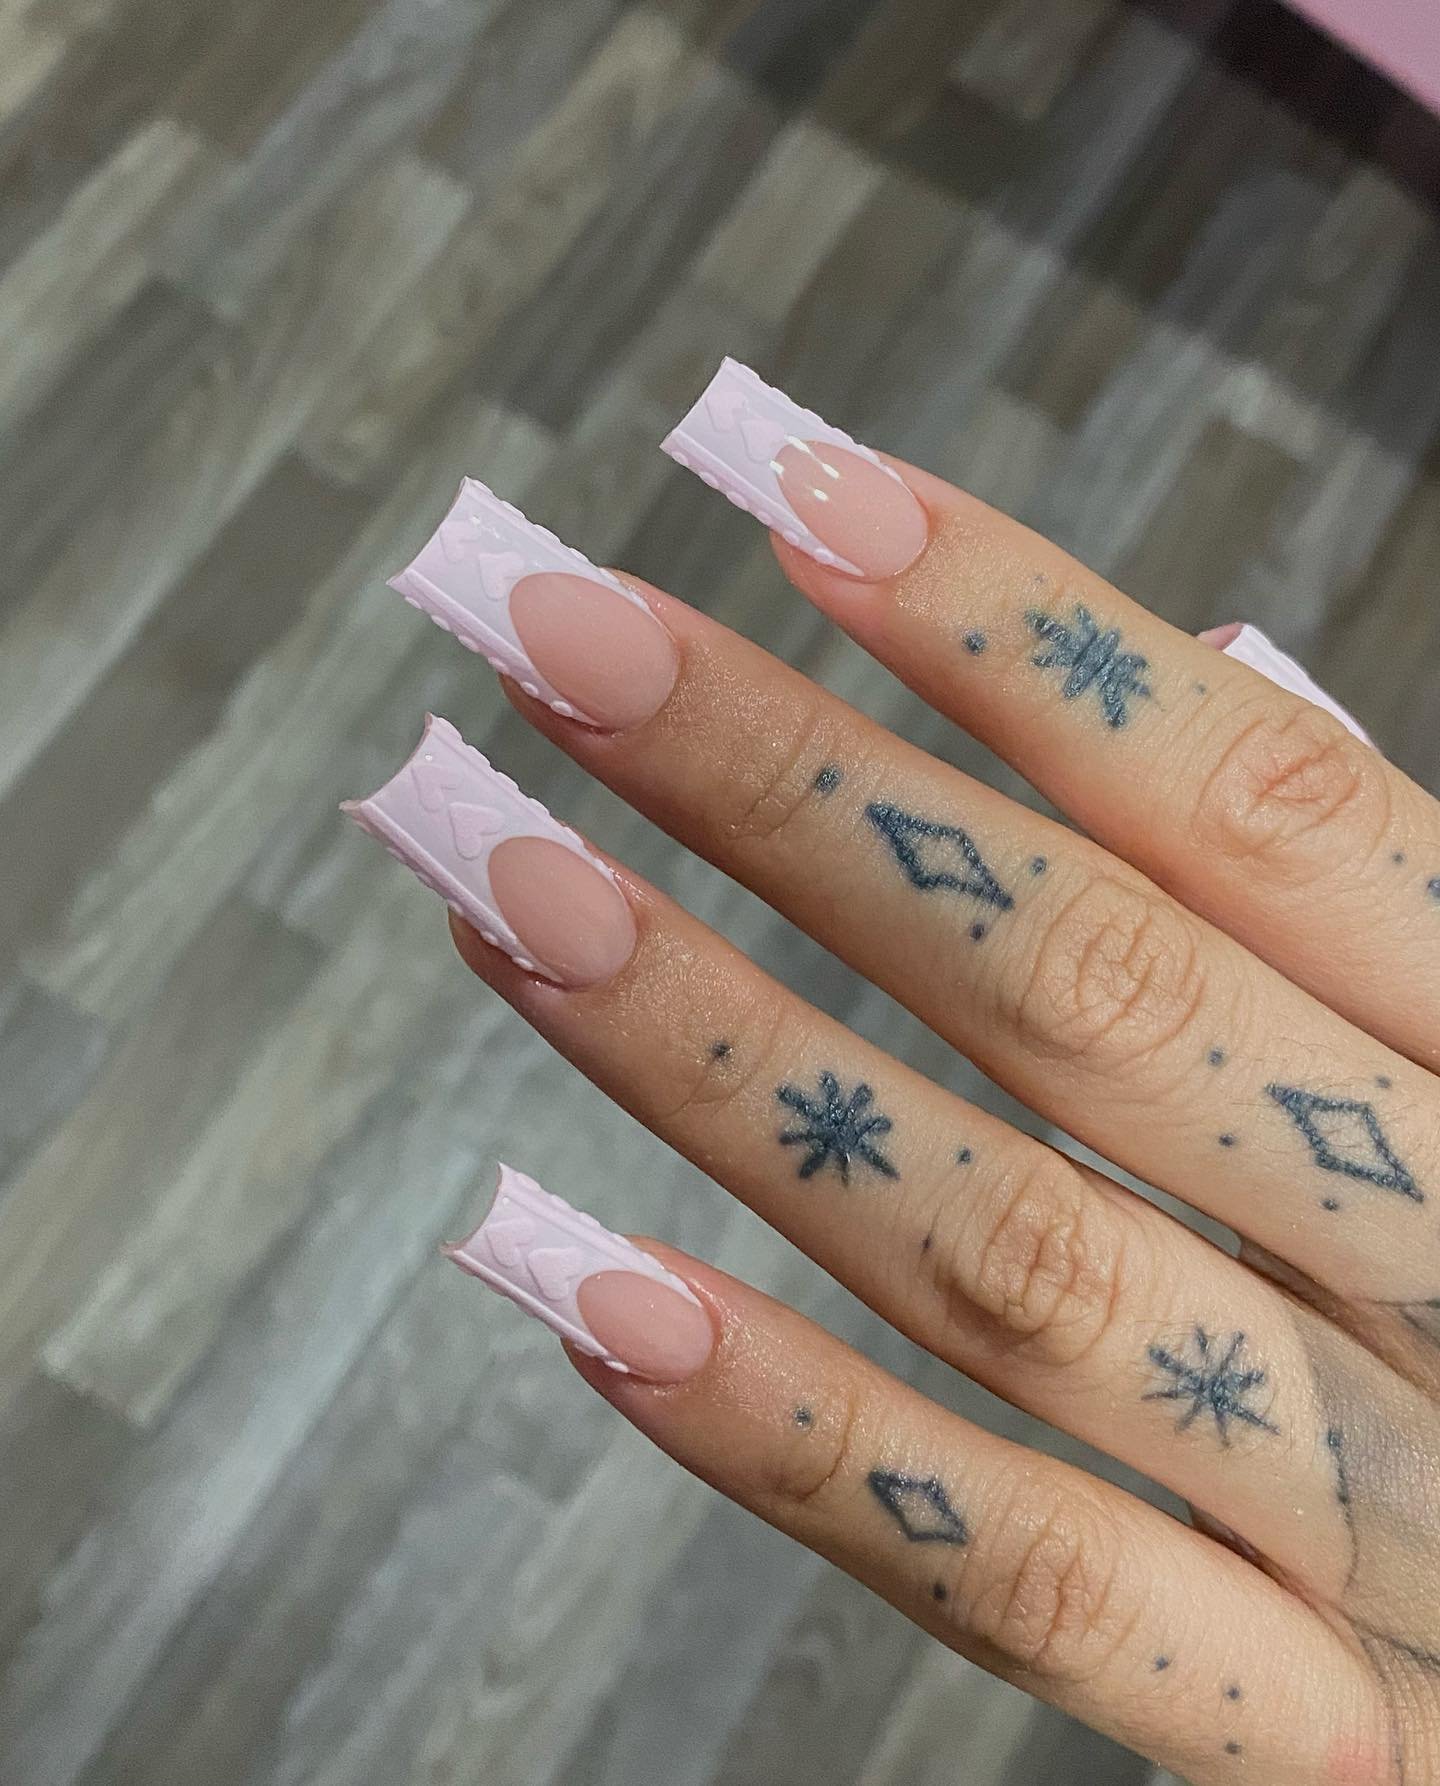 44 - Picture of French Tip Nails